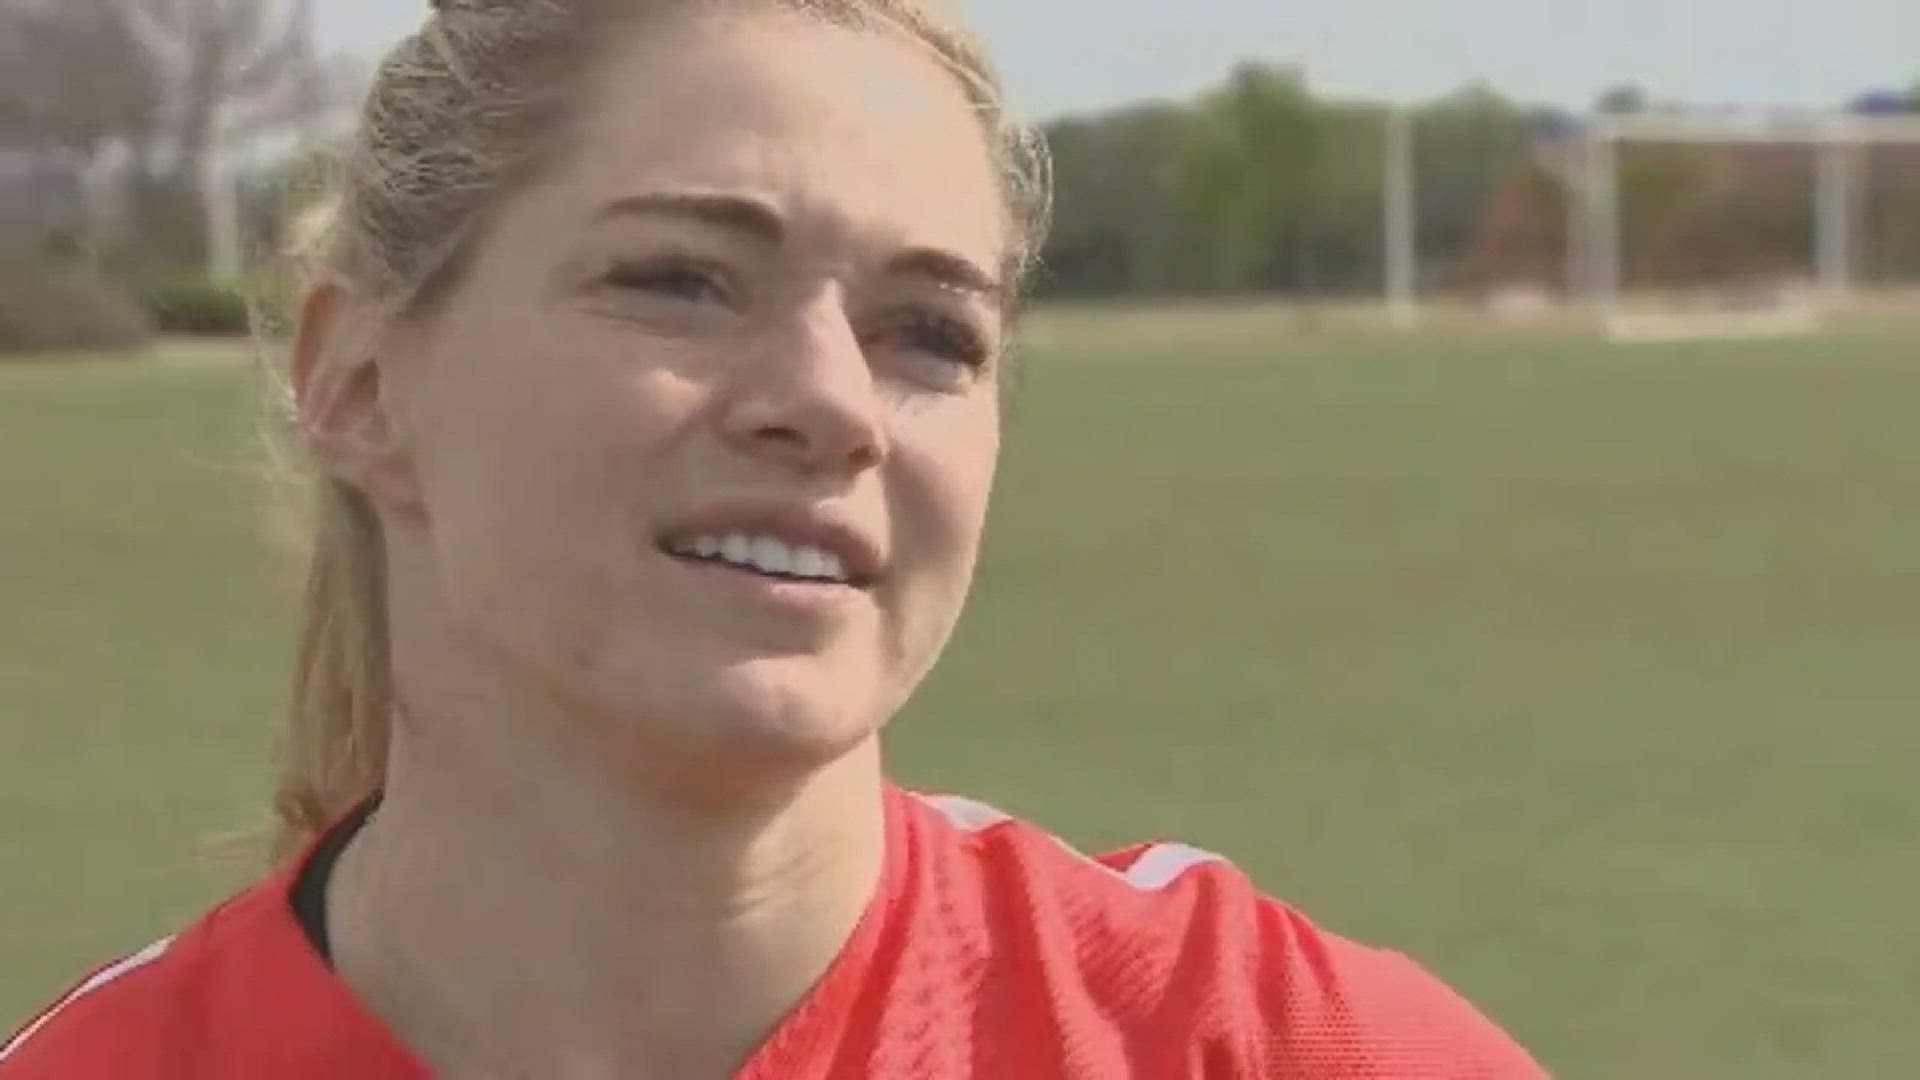 KHOU Sports' Matt Musil caught up with Houston Dash star Kealia Ohai, who opened up about her relationship with Texans defensive end J.J. Watt.